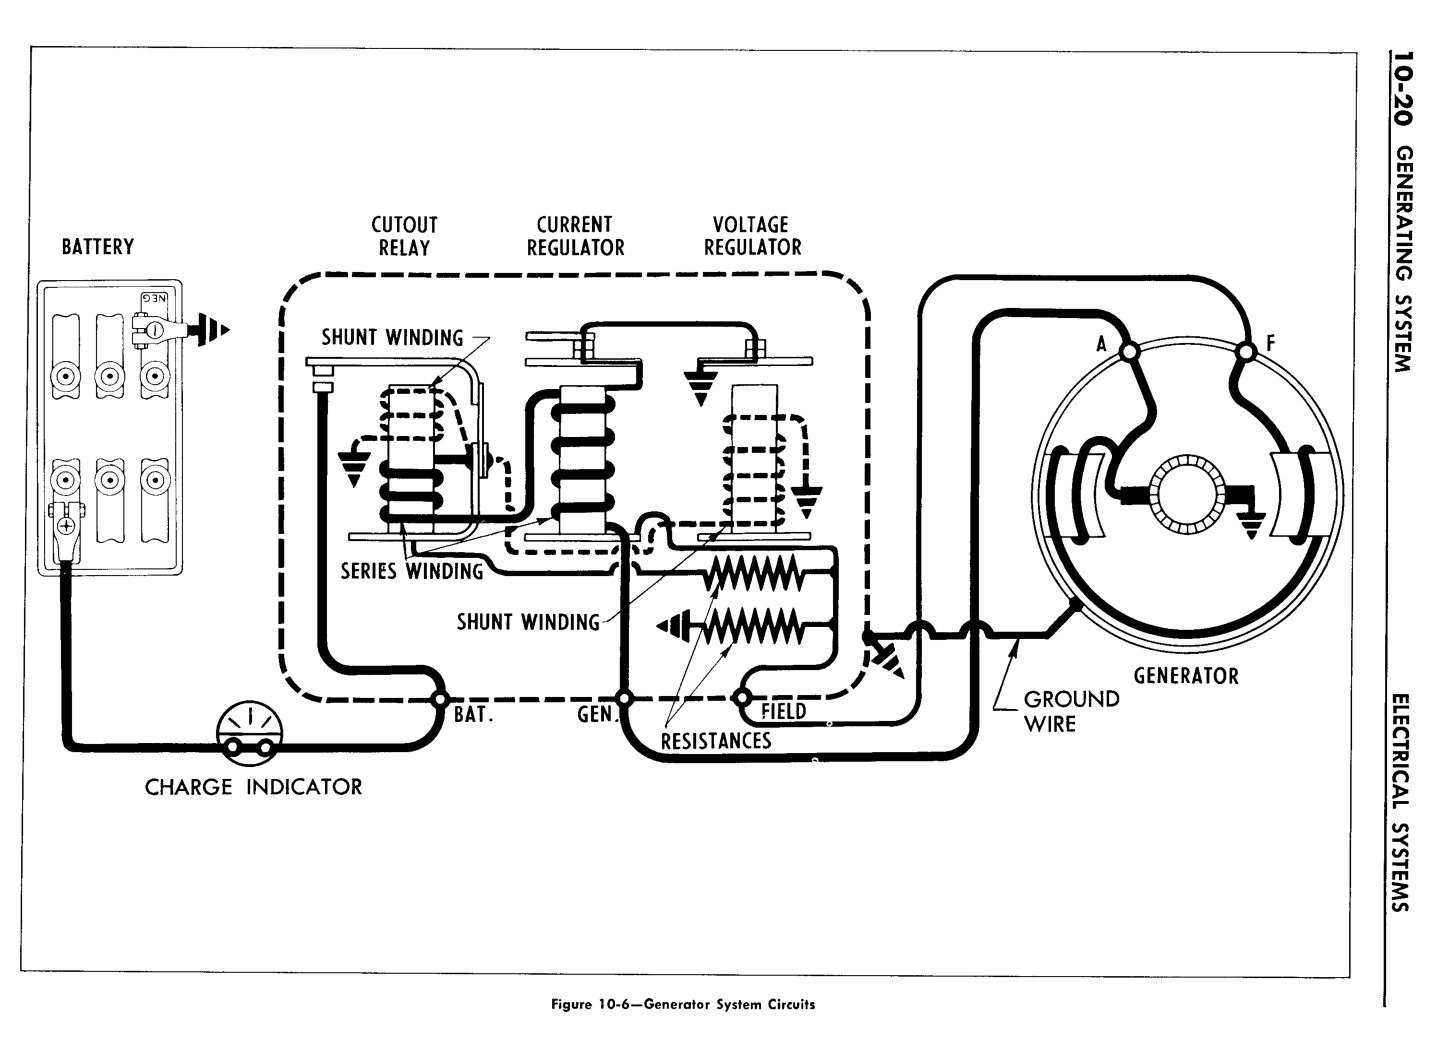 n_11 1957 Buick Shop Manual - Electrical Systems-020-020.jpg